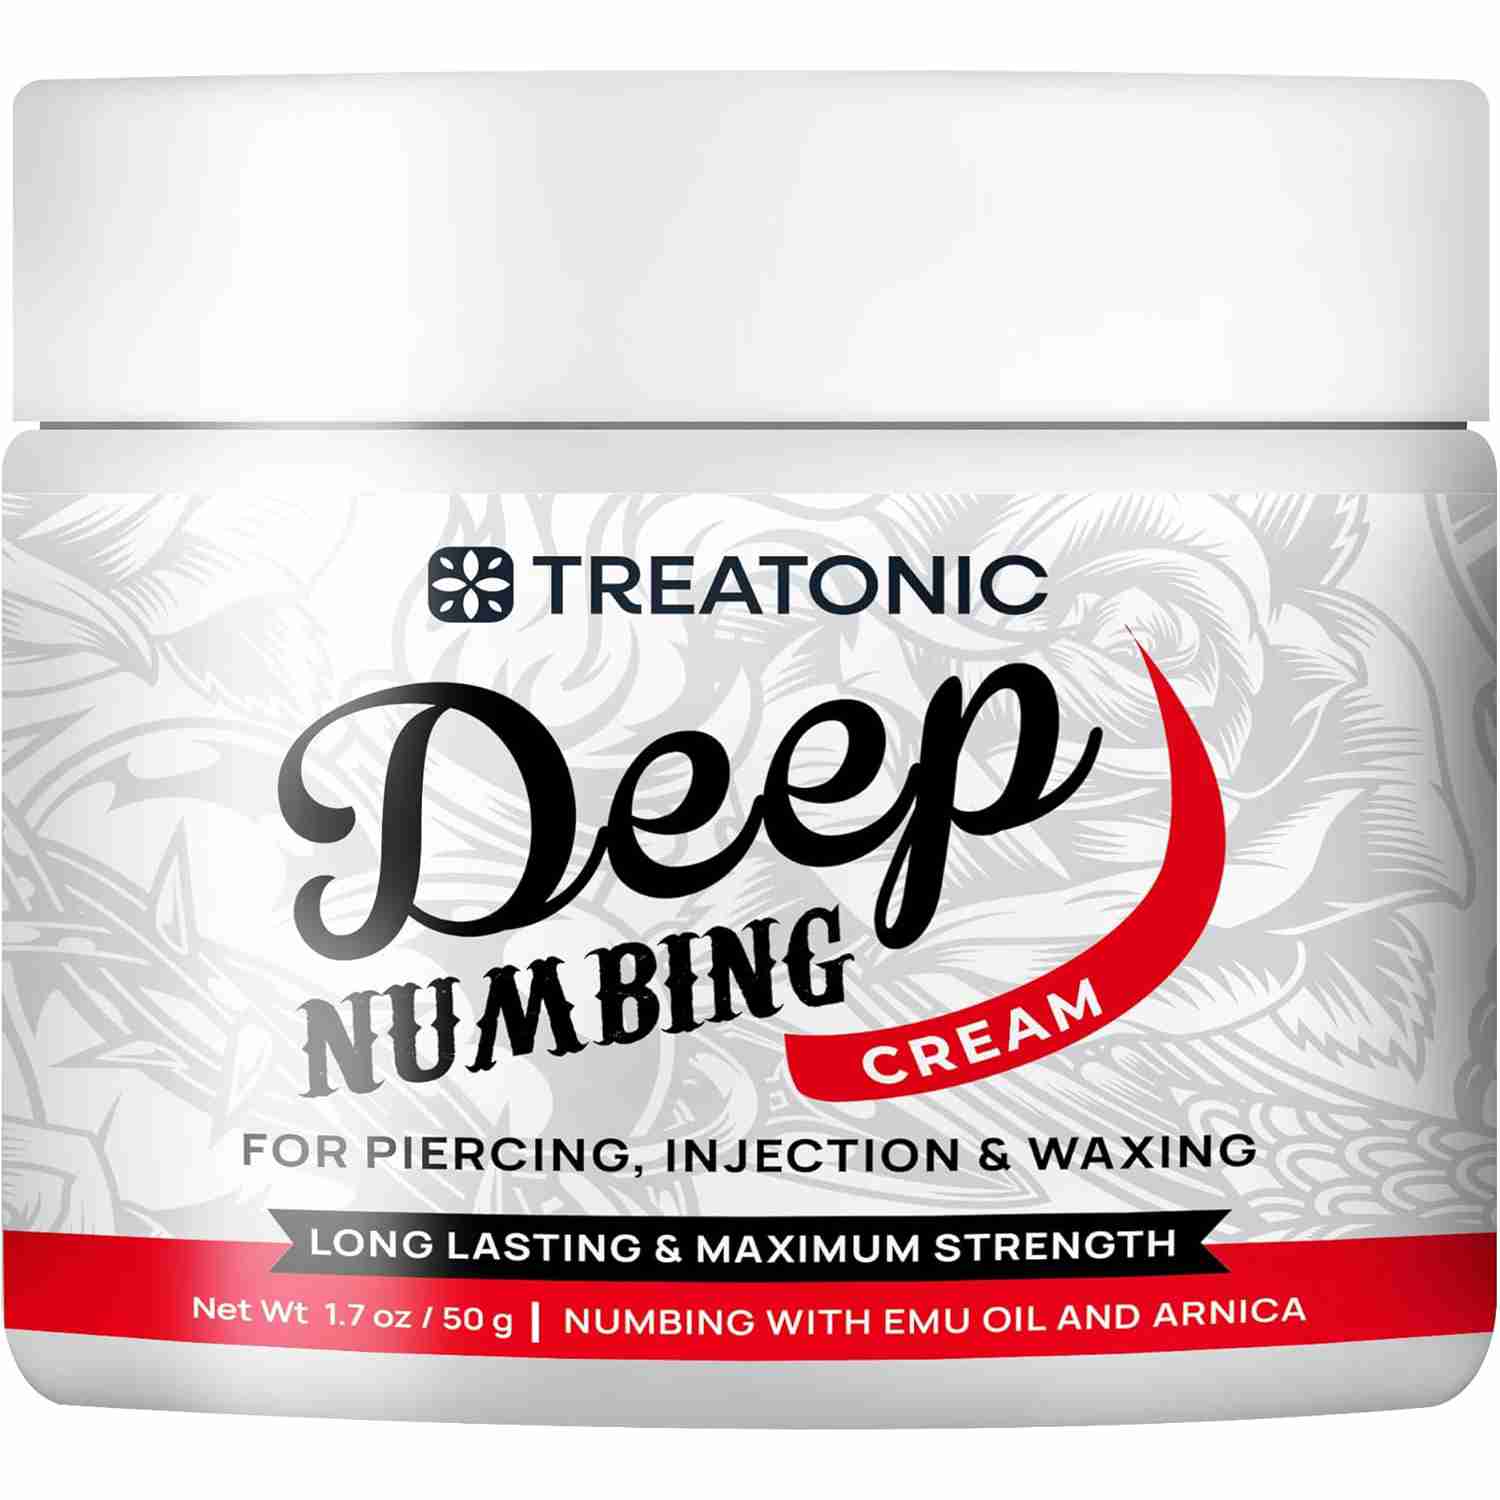 numbing-cream-for-waxing with cash back rebate